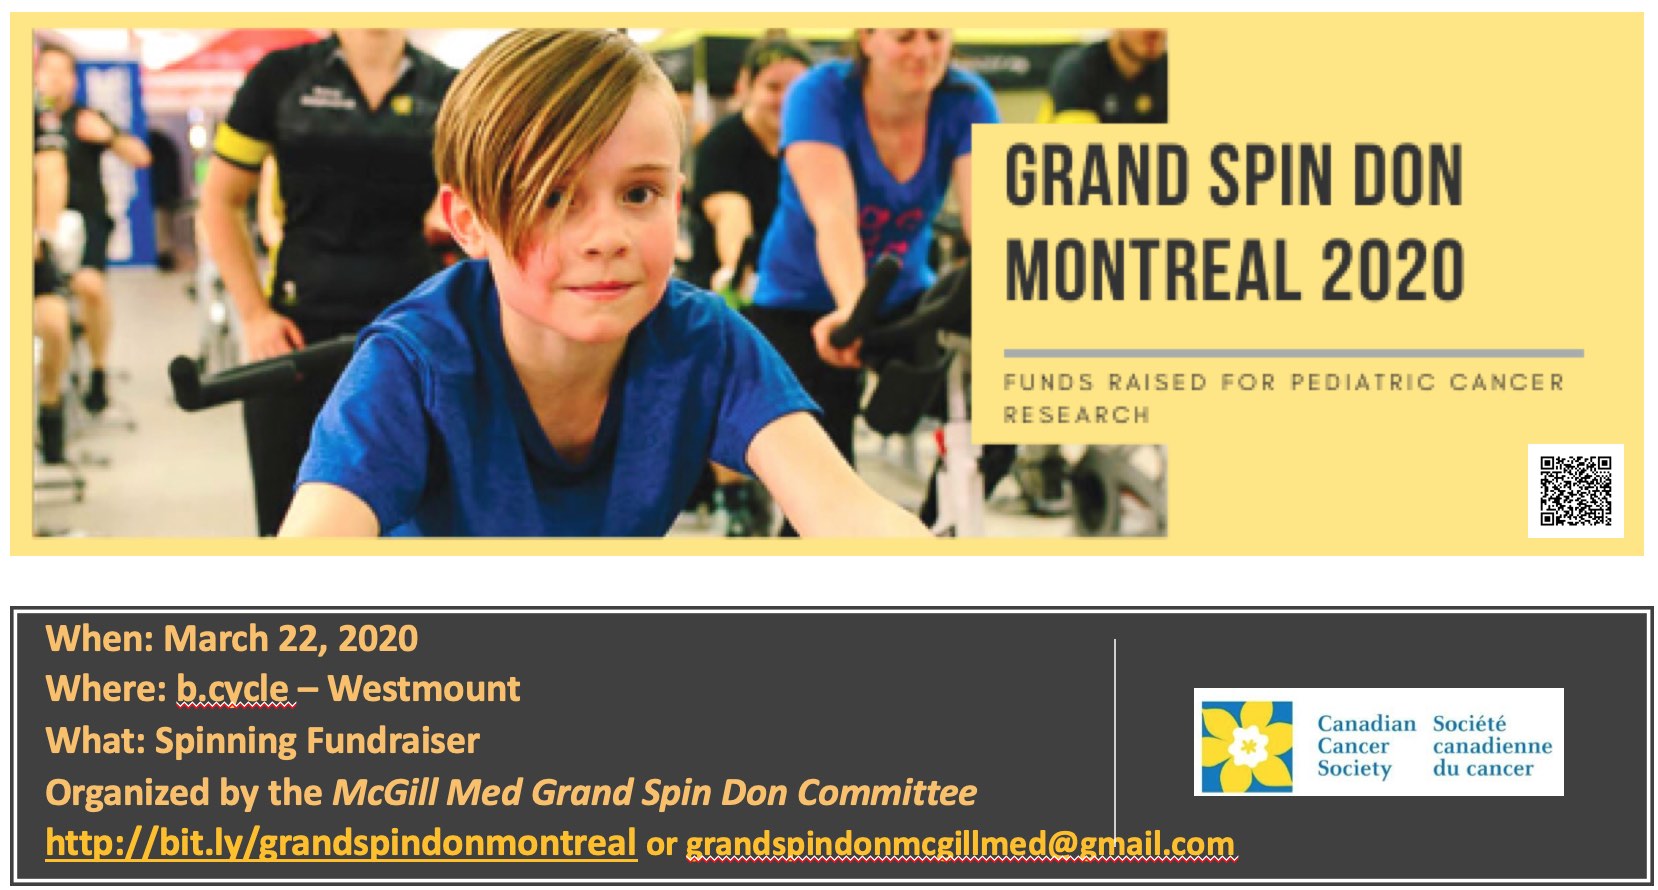 Grand Spin Don Montreal 2020